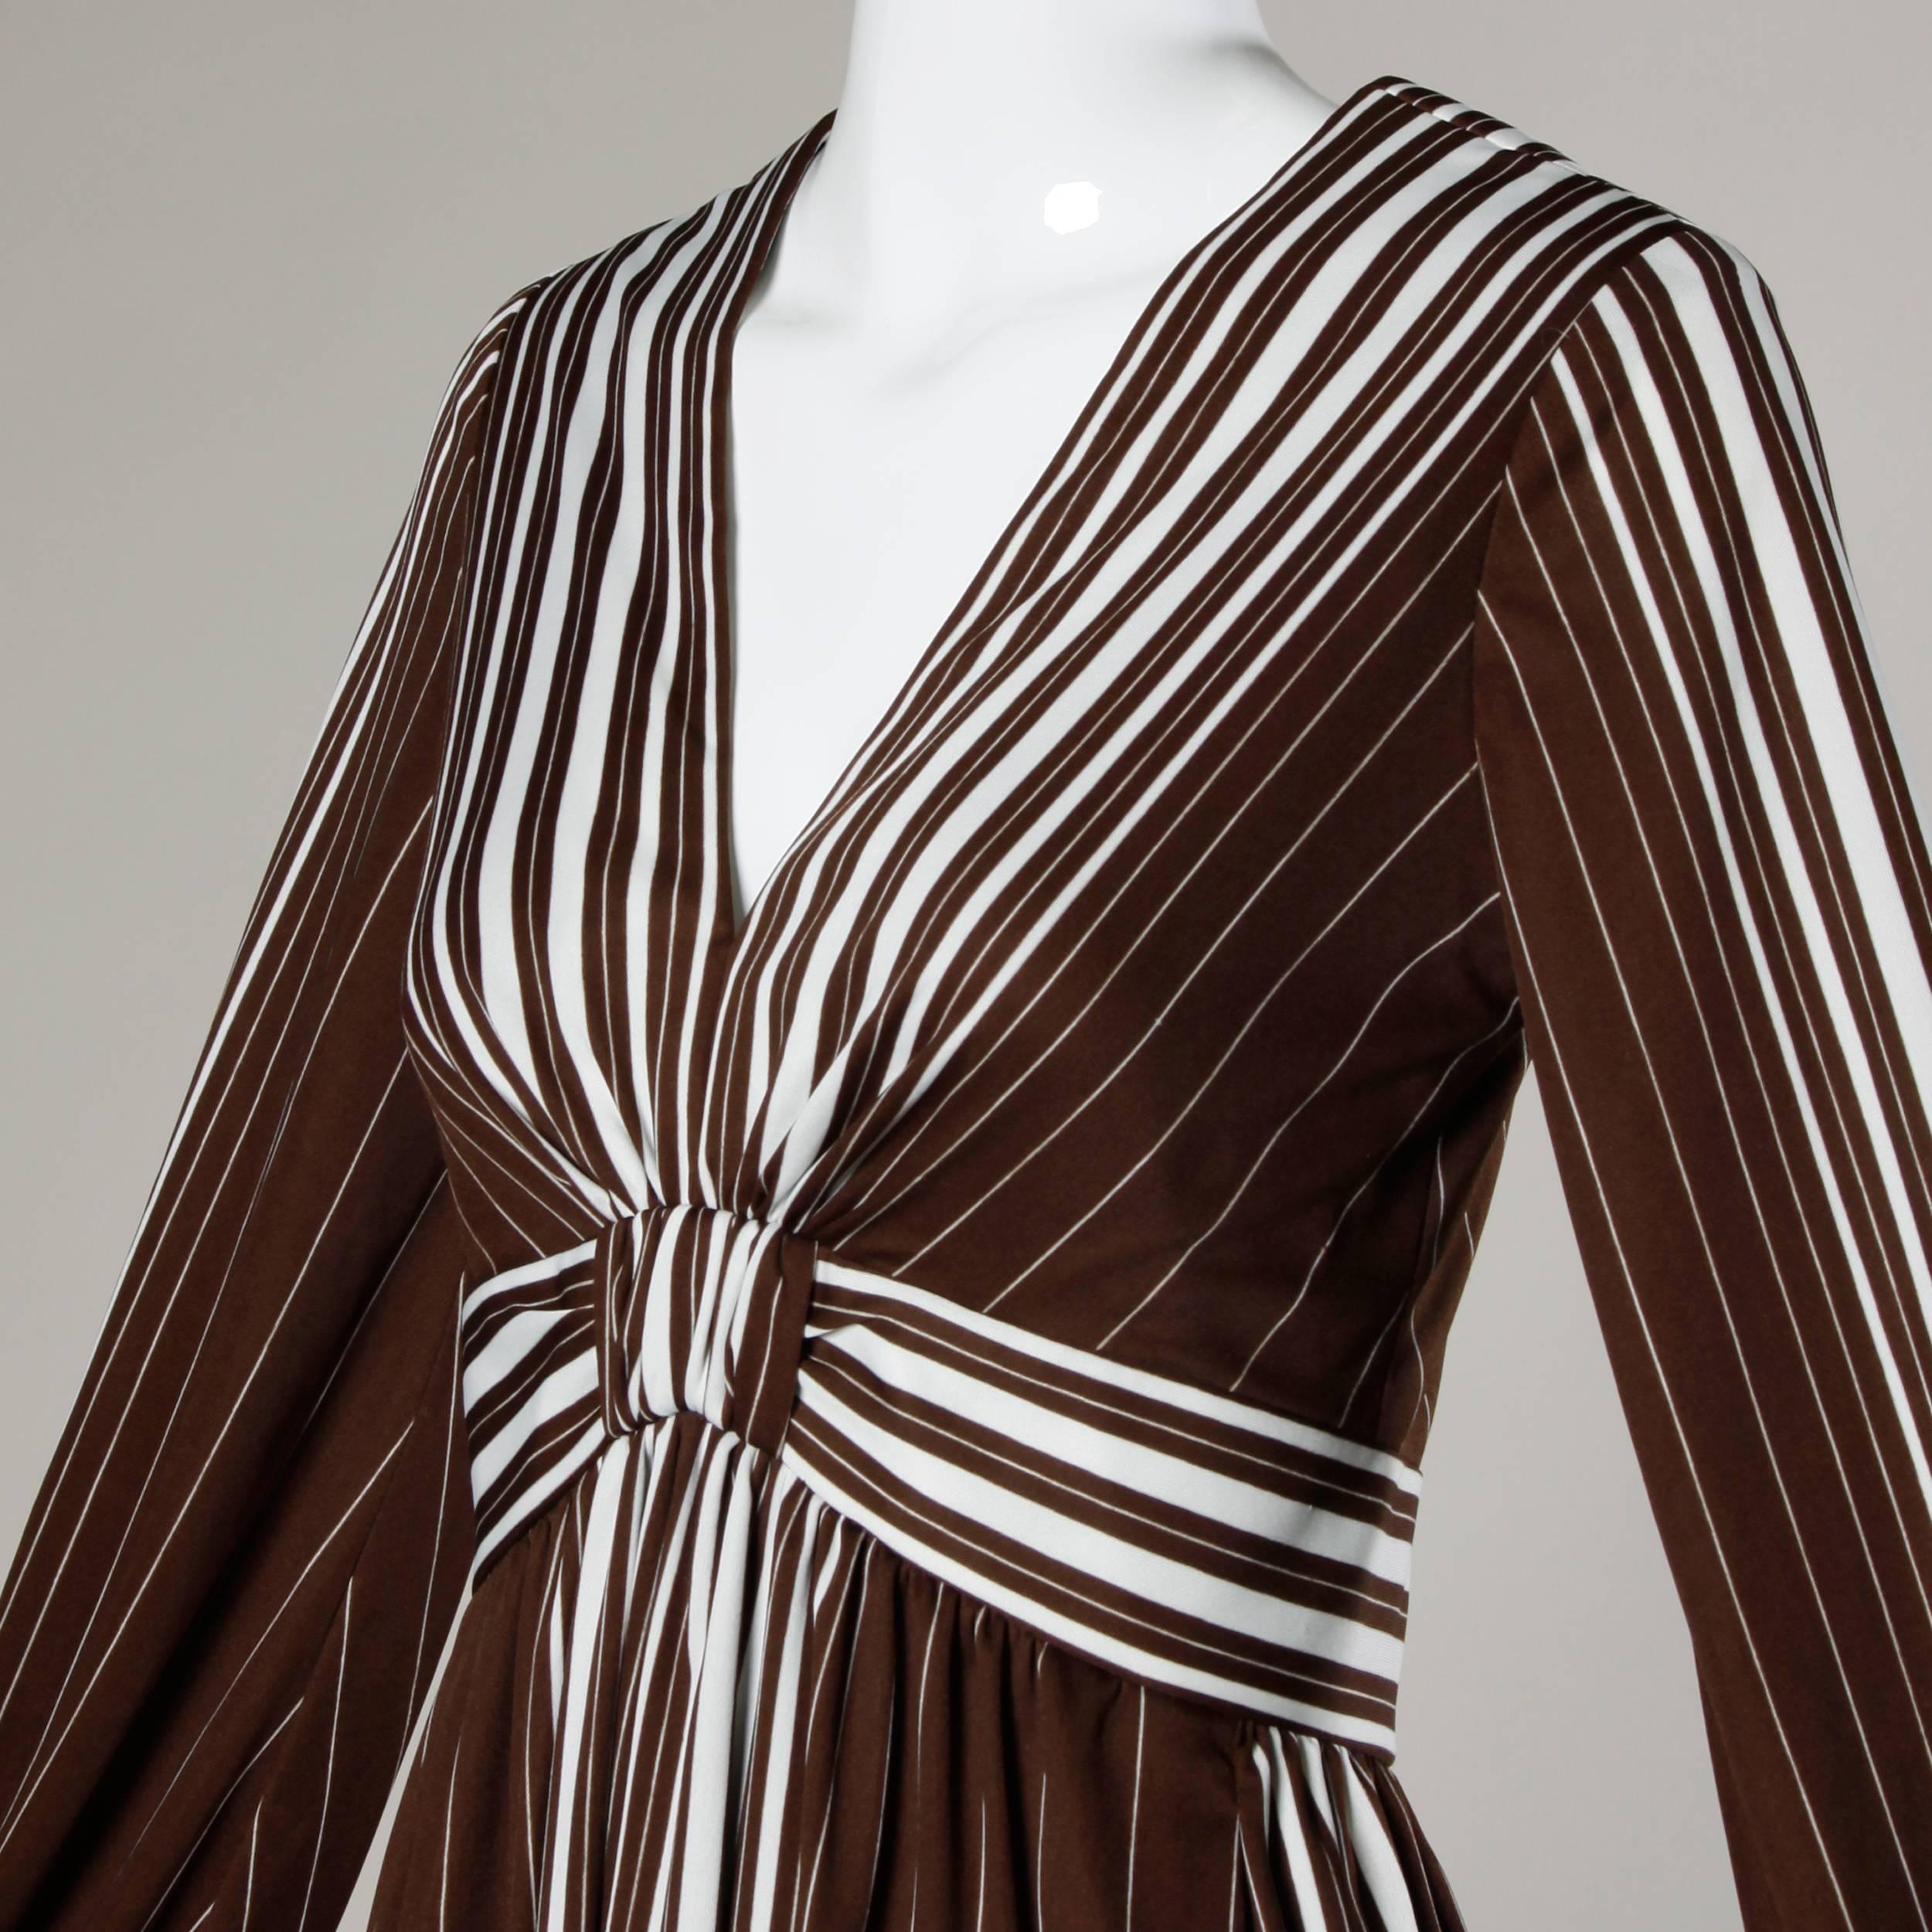 Graphic brown and white striped maxi dress with a plunging neckline by Estevez. Long sleeves and empire waist.

Details:

Back Zip Closure
Estimated Size: Small
Color: Brown/ White
Fabric: Jersey
Label: The Eva Gabor Look by